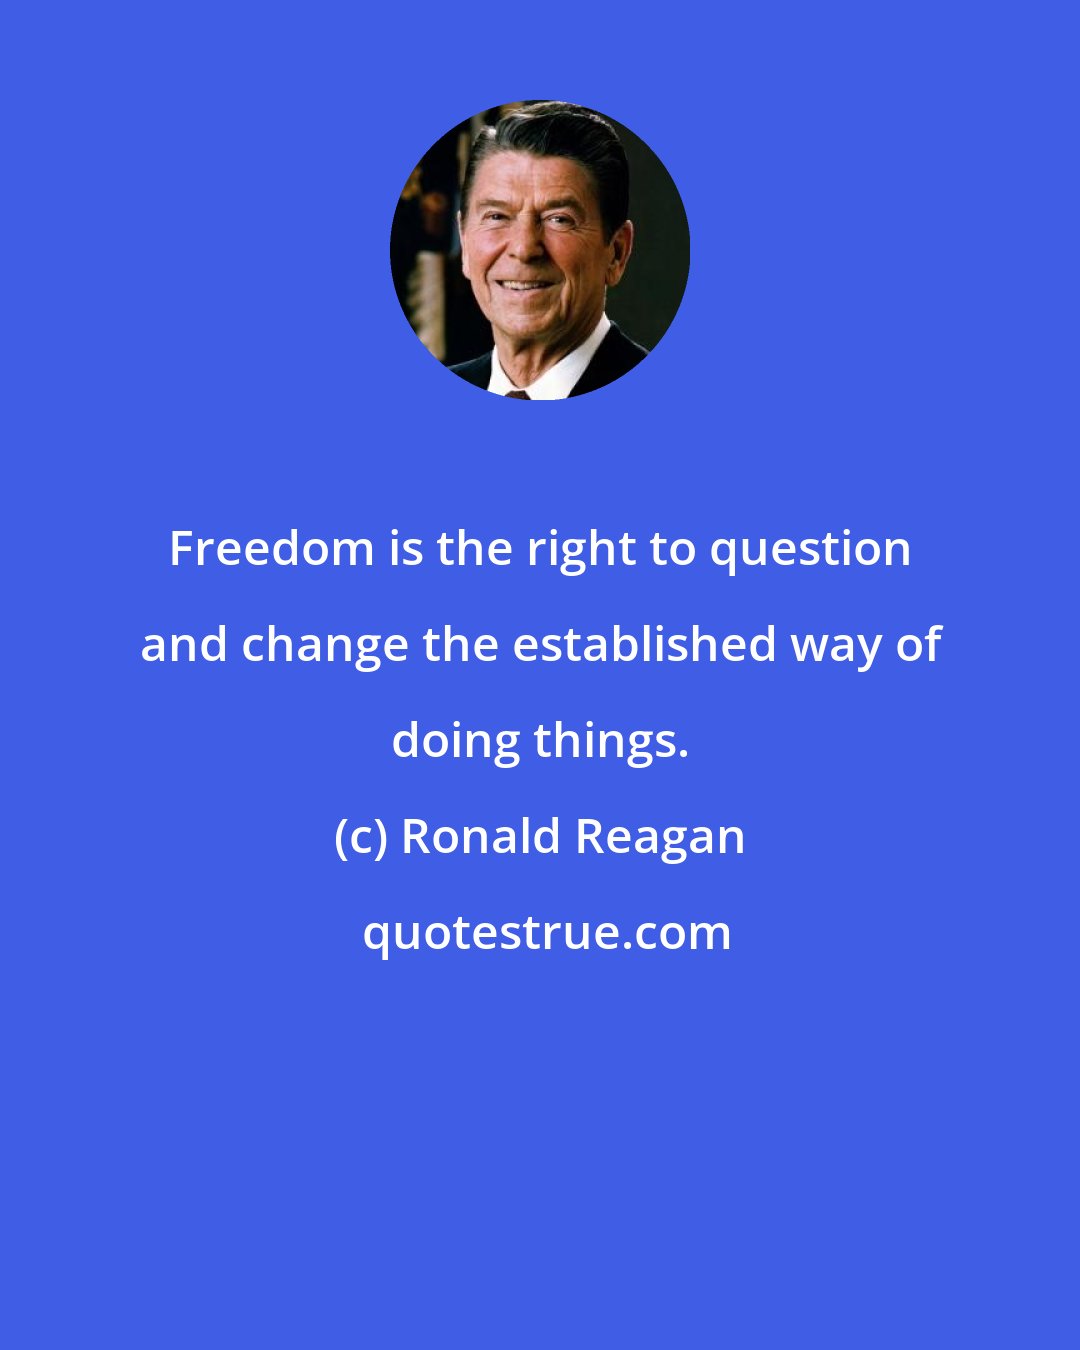 Ronald Reagan: Freedom is the right to question and change the established way of doing things.